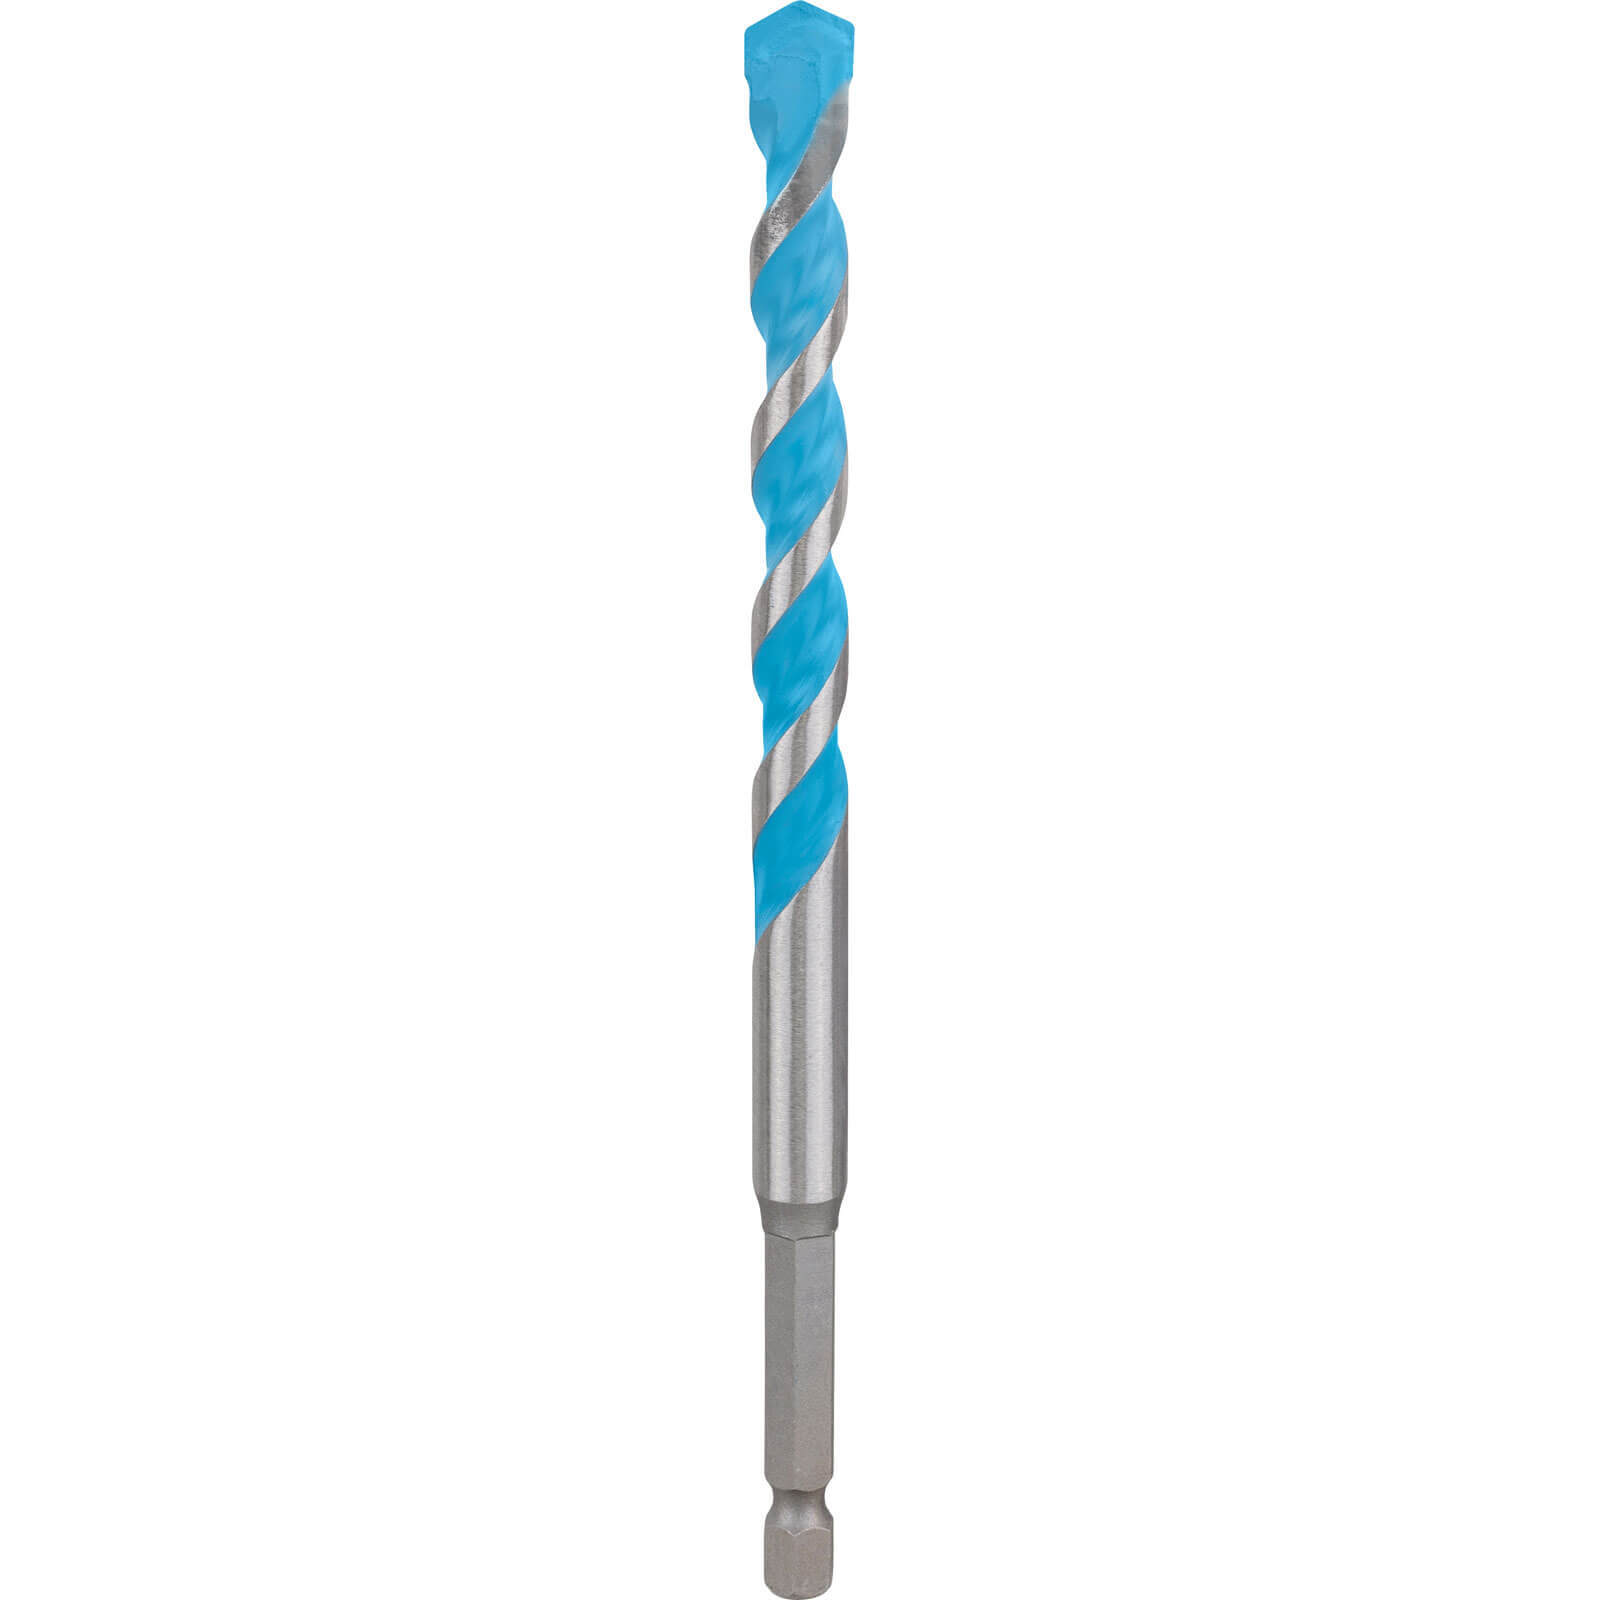 Image of Bosch Expert HEX-9 Multi Construction Drill Bit 10mm 150mm Pack of 1